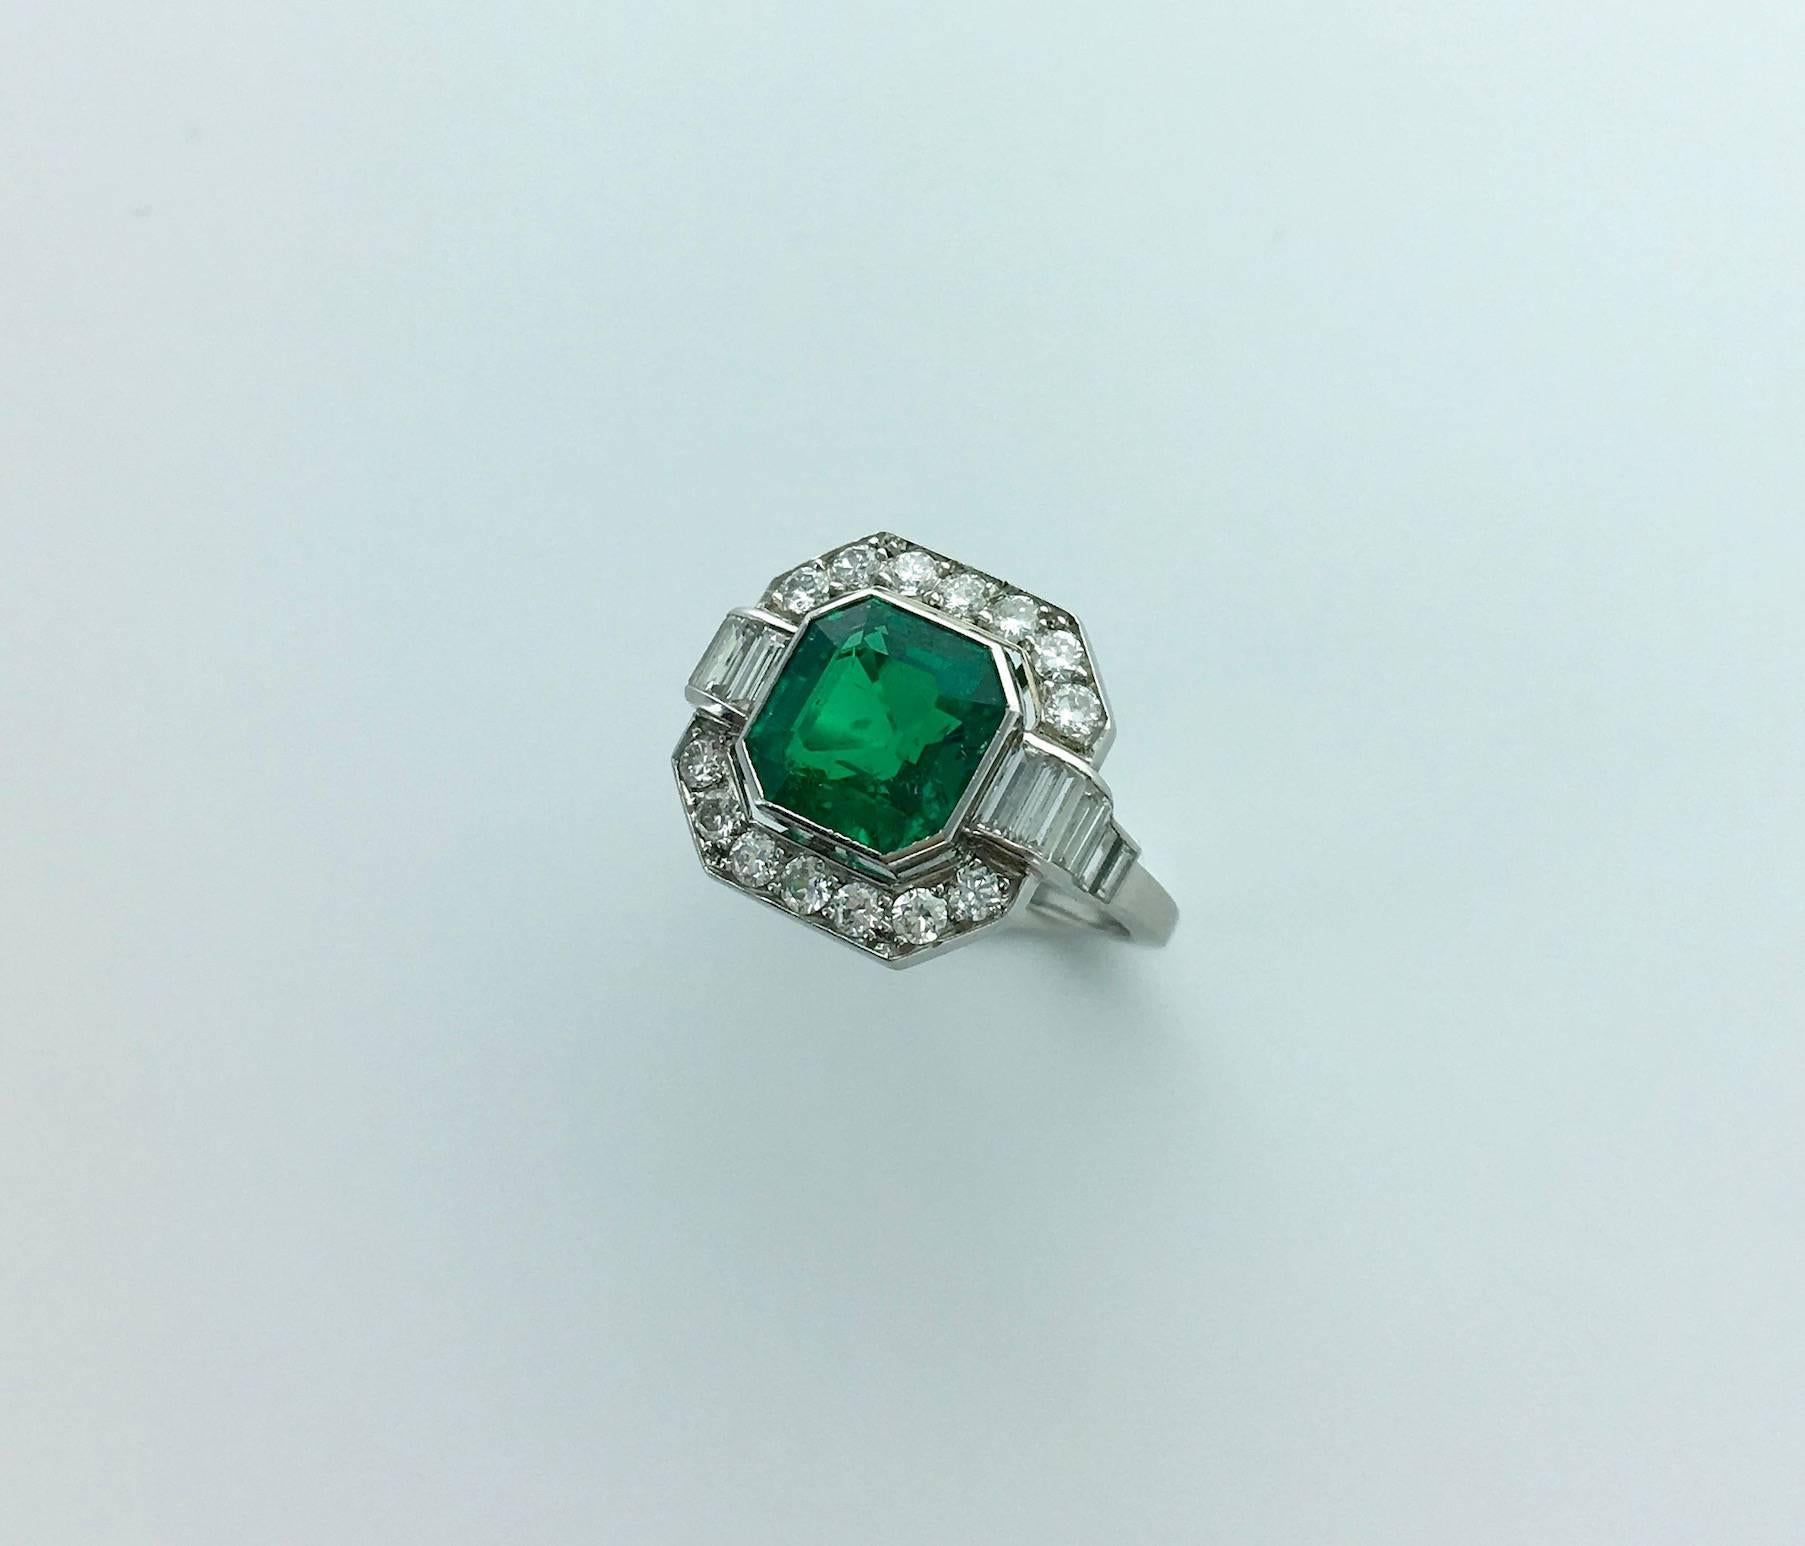 Exceptional Colombian Emerald of this quality and color are almost unfindable nowadays.
This Diamond and Platinum Art Deco Ring is centered by this incredible Emerald weighting approximately 4.10 carats.
The result is Stunning!
Circa 1930.

The